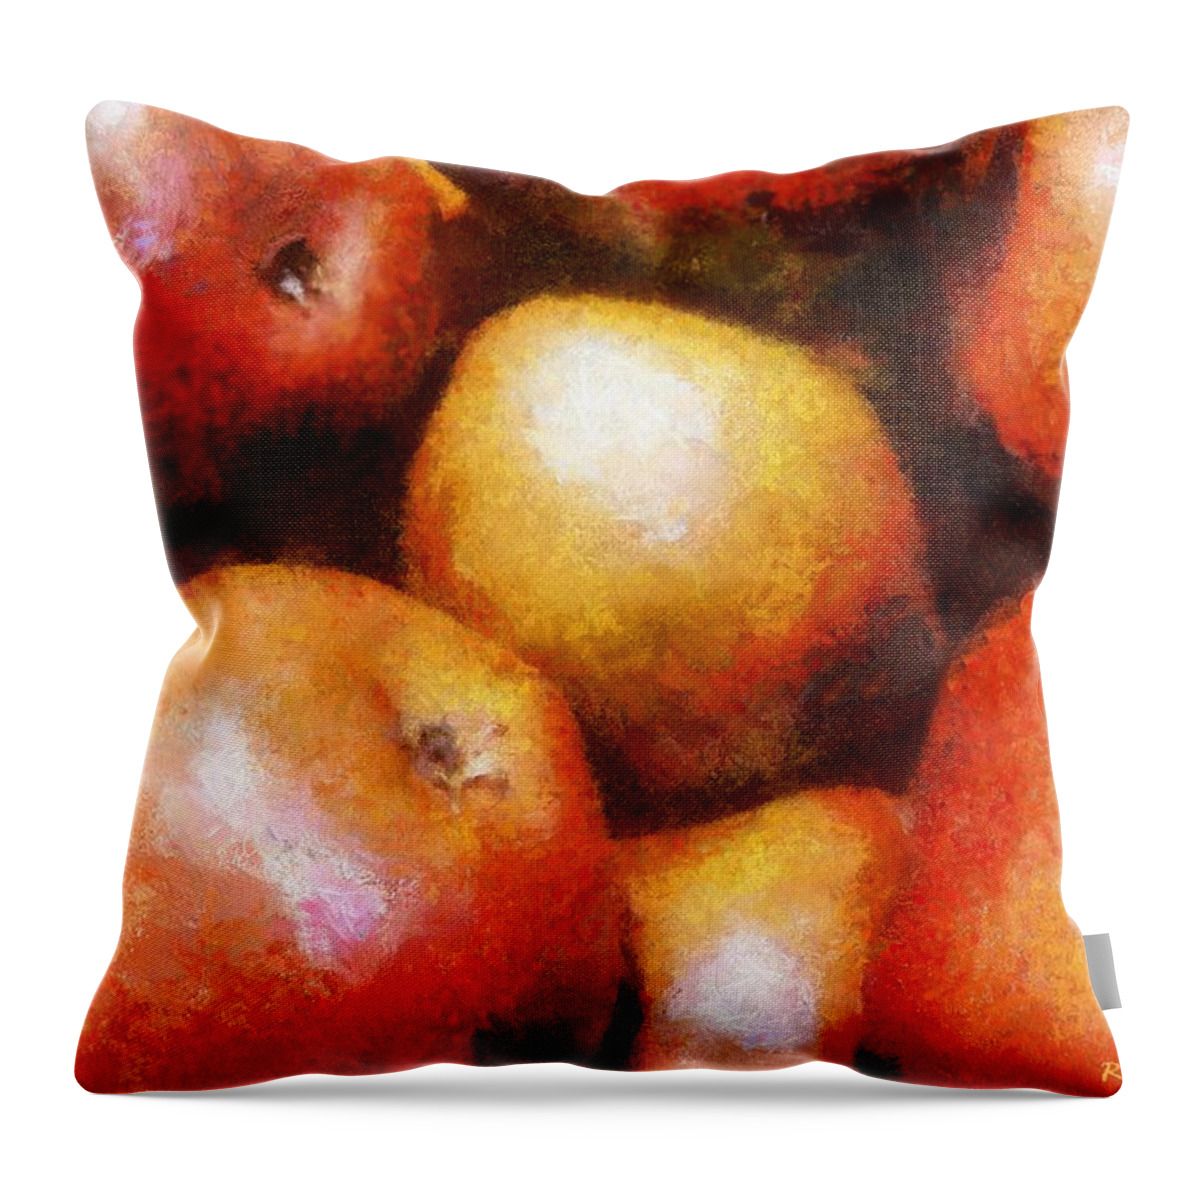 Fruit Throw Pillow featuring the painting Pears d'Anjou by RC DeWinter